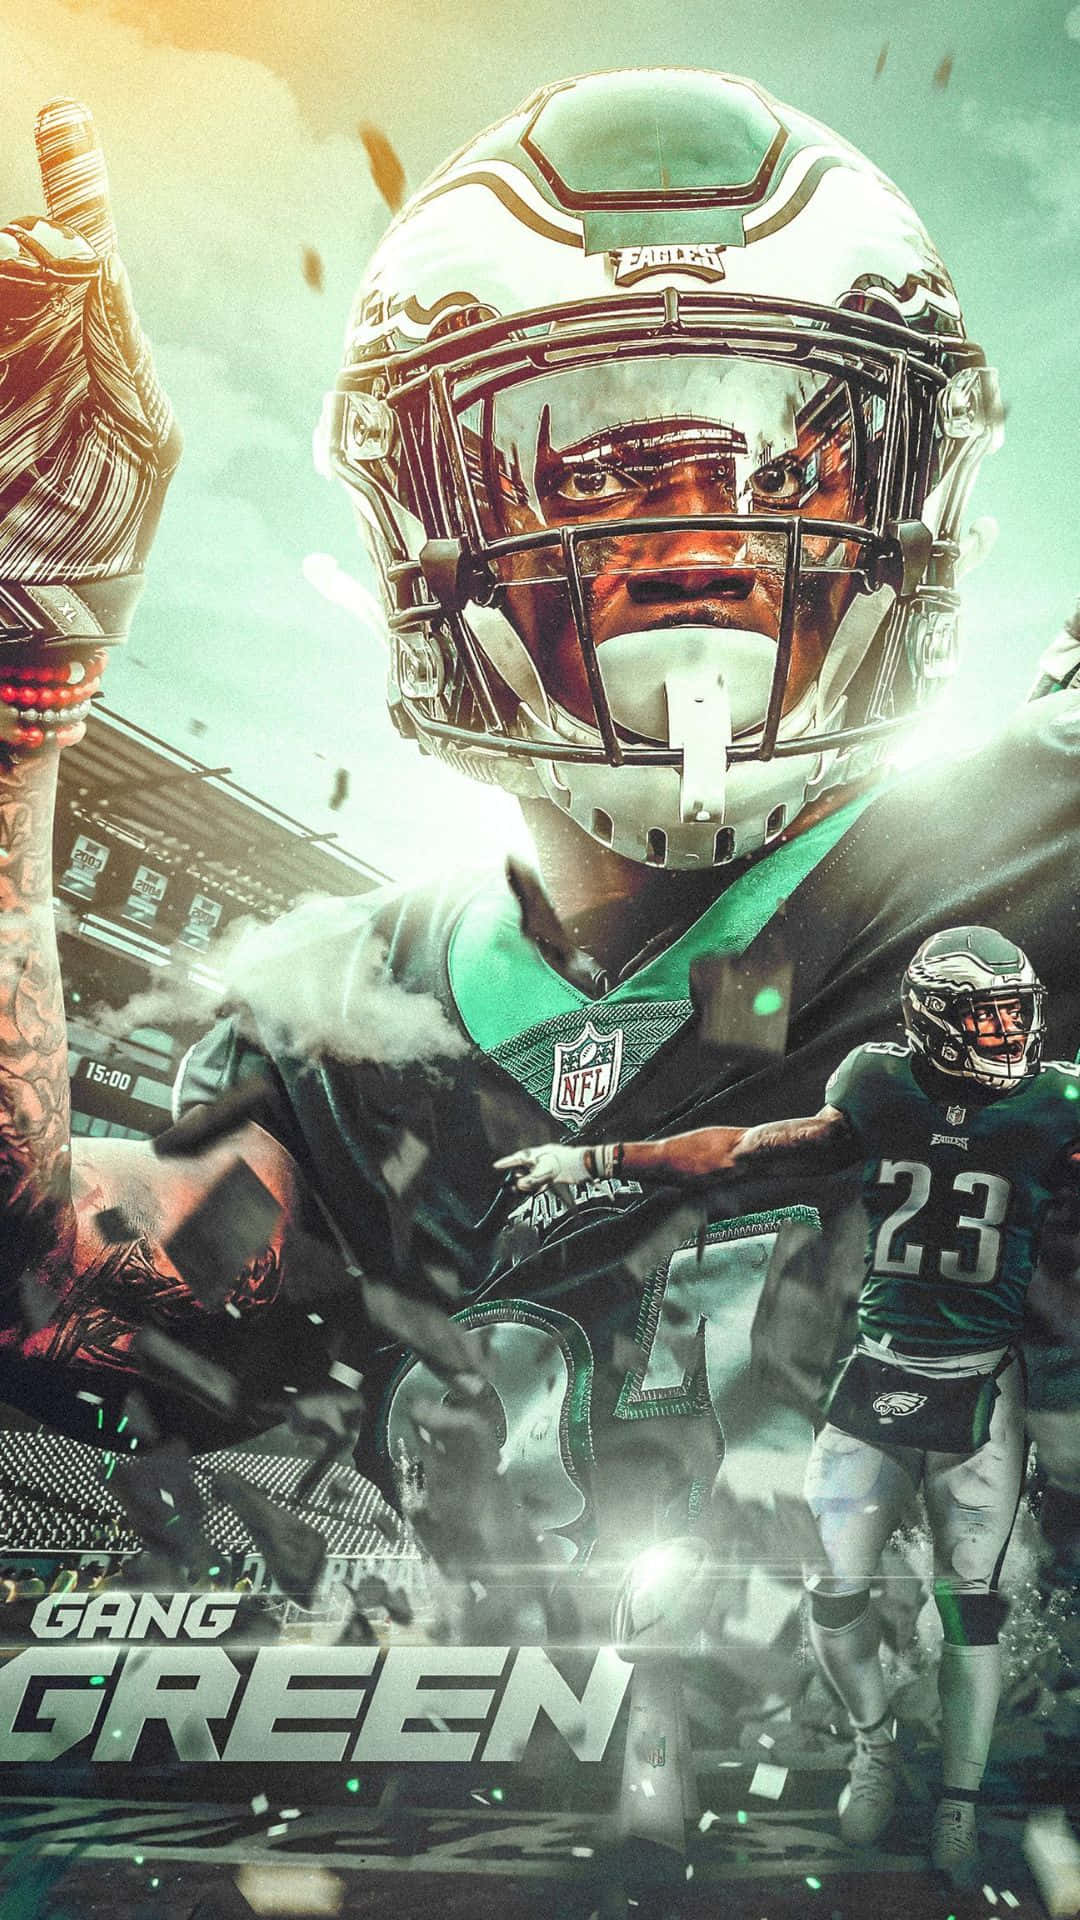 Eagles Football HD Wallpaper For iPhone - 2023 NFL Football Wallpapers   Philadelphia eagles wallpaper, Eagles football, Nfl football wallpaper